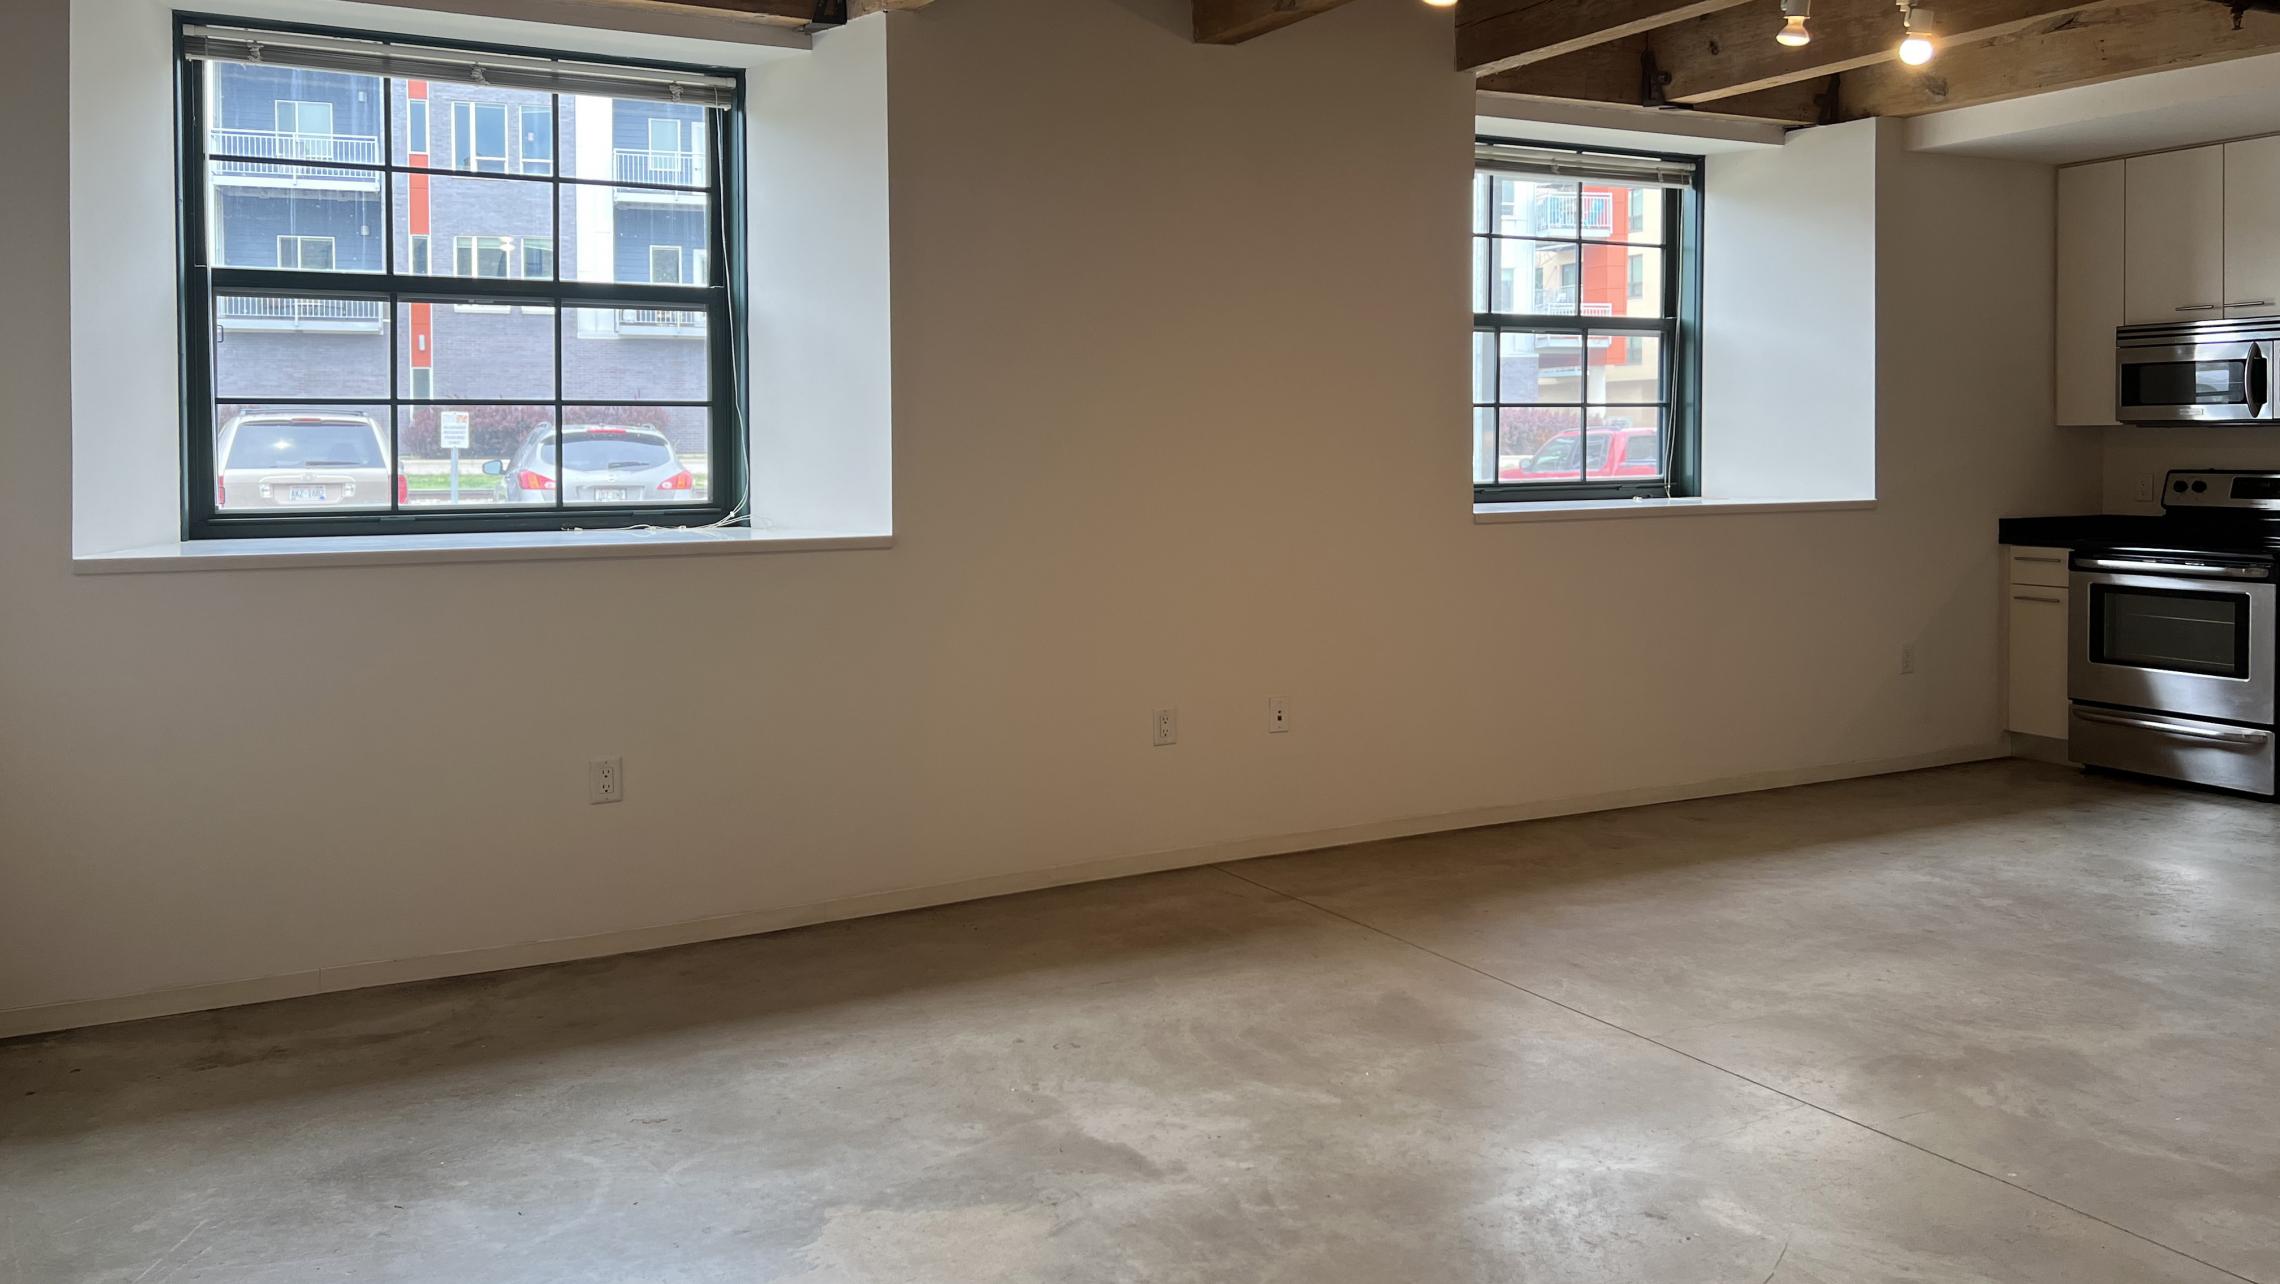 Tobacco-Lofts-at-The-Yards-Apartment-E107-Studio-Historic-Design-Exposed-Brick-Concrete-Floors-Downtown-Madison-Fitness-Lounge-Courtyard-Views-Cat-Upscale-Modern-Home